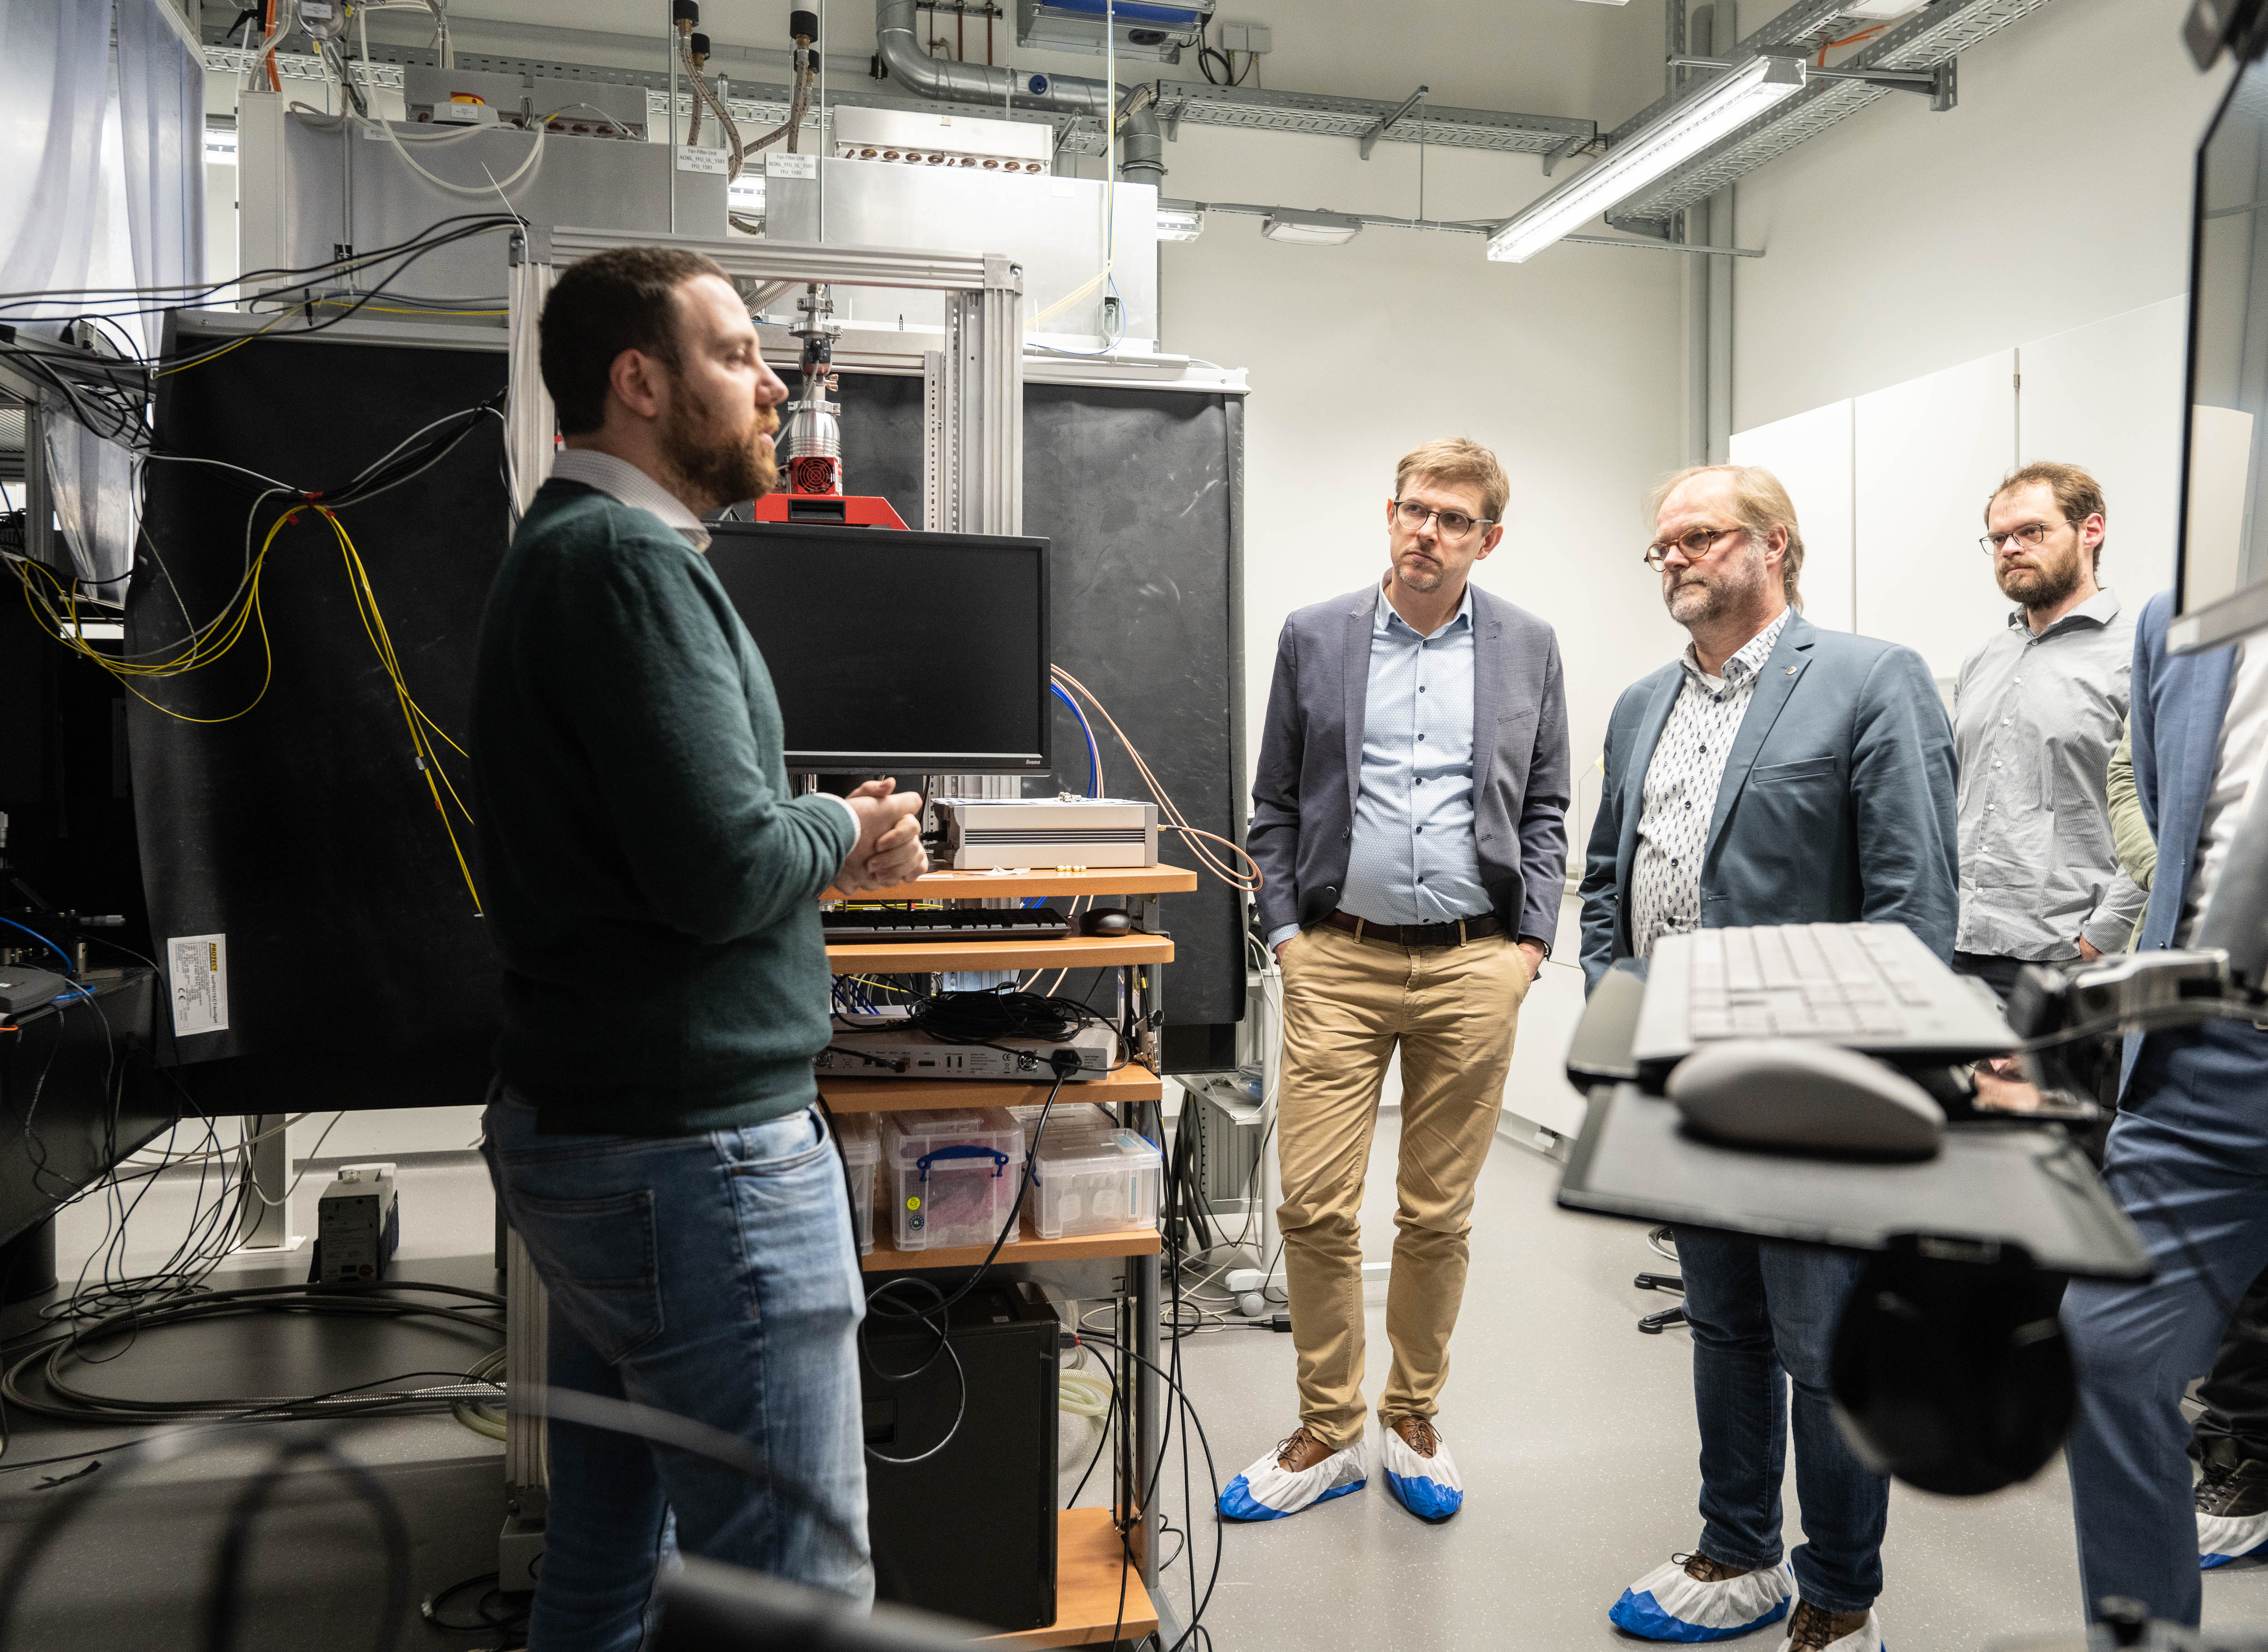 Together with Andreas Tünnermann, the delegation of MEPs visited the labs for tap-proof quantum communication of the Fraunhofer IOF in Jena.